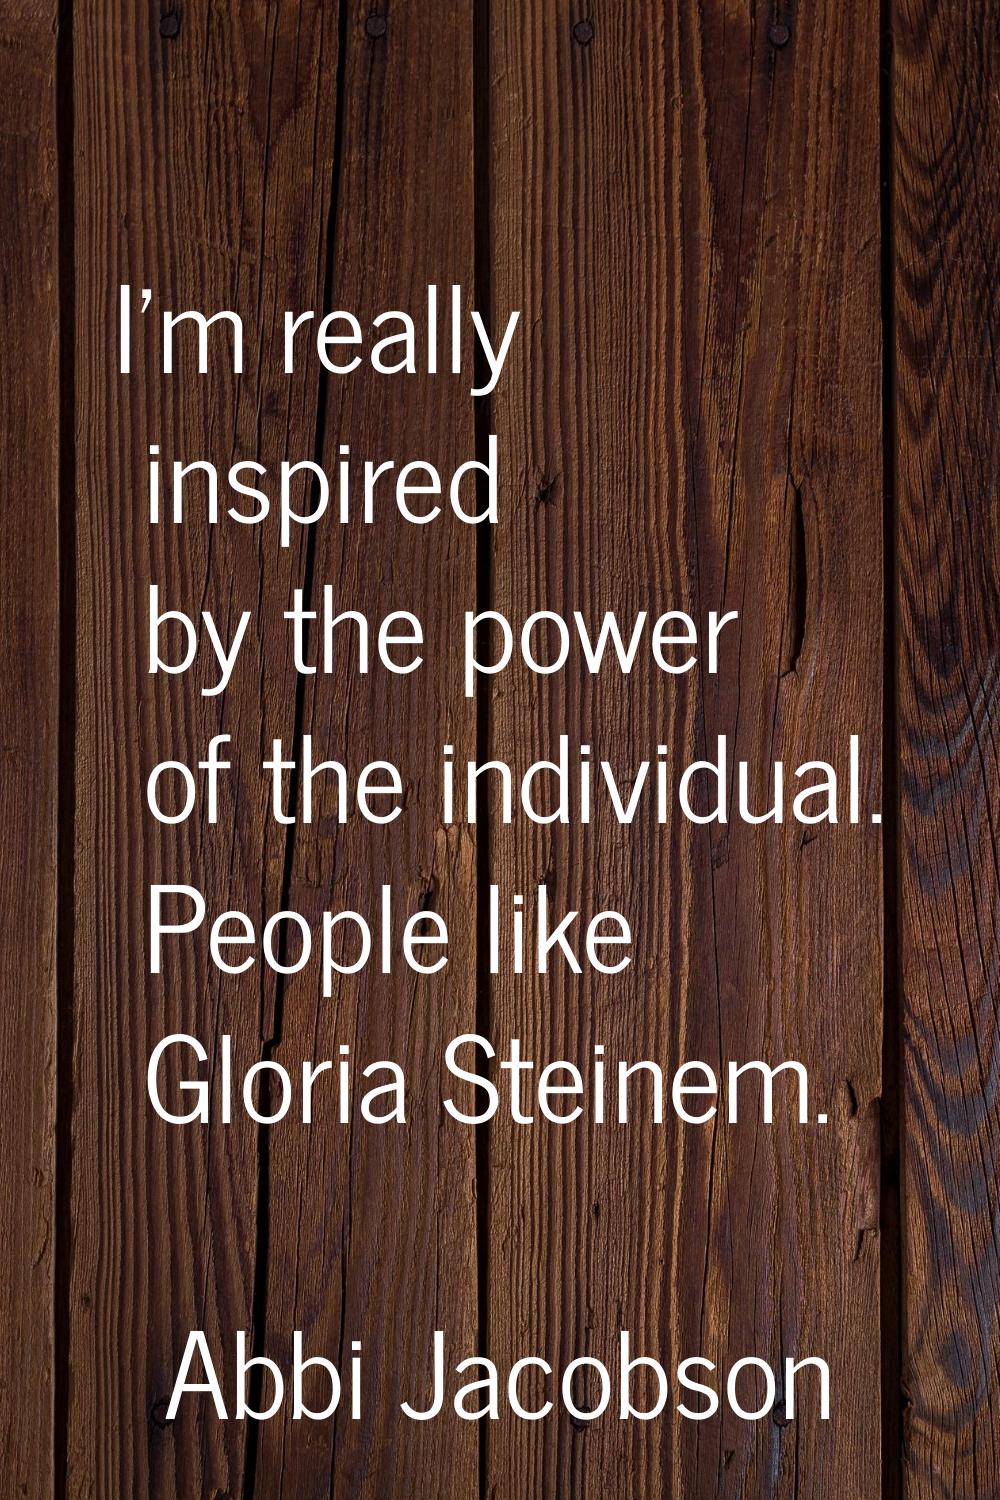 I'm really inspired by the power of the individual. People like Gloria Steinem.